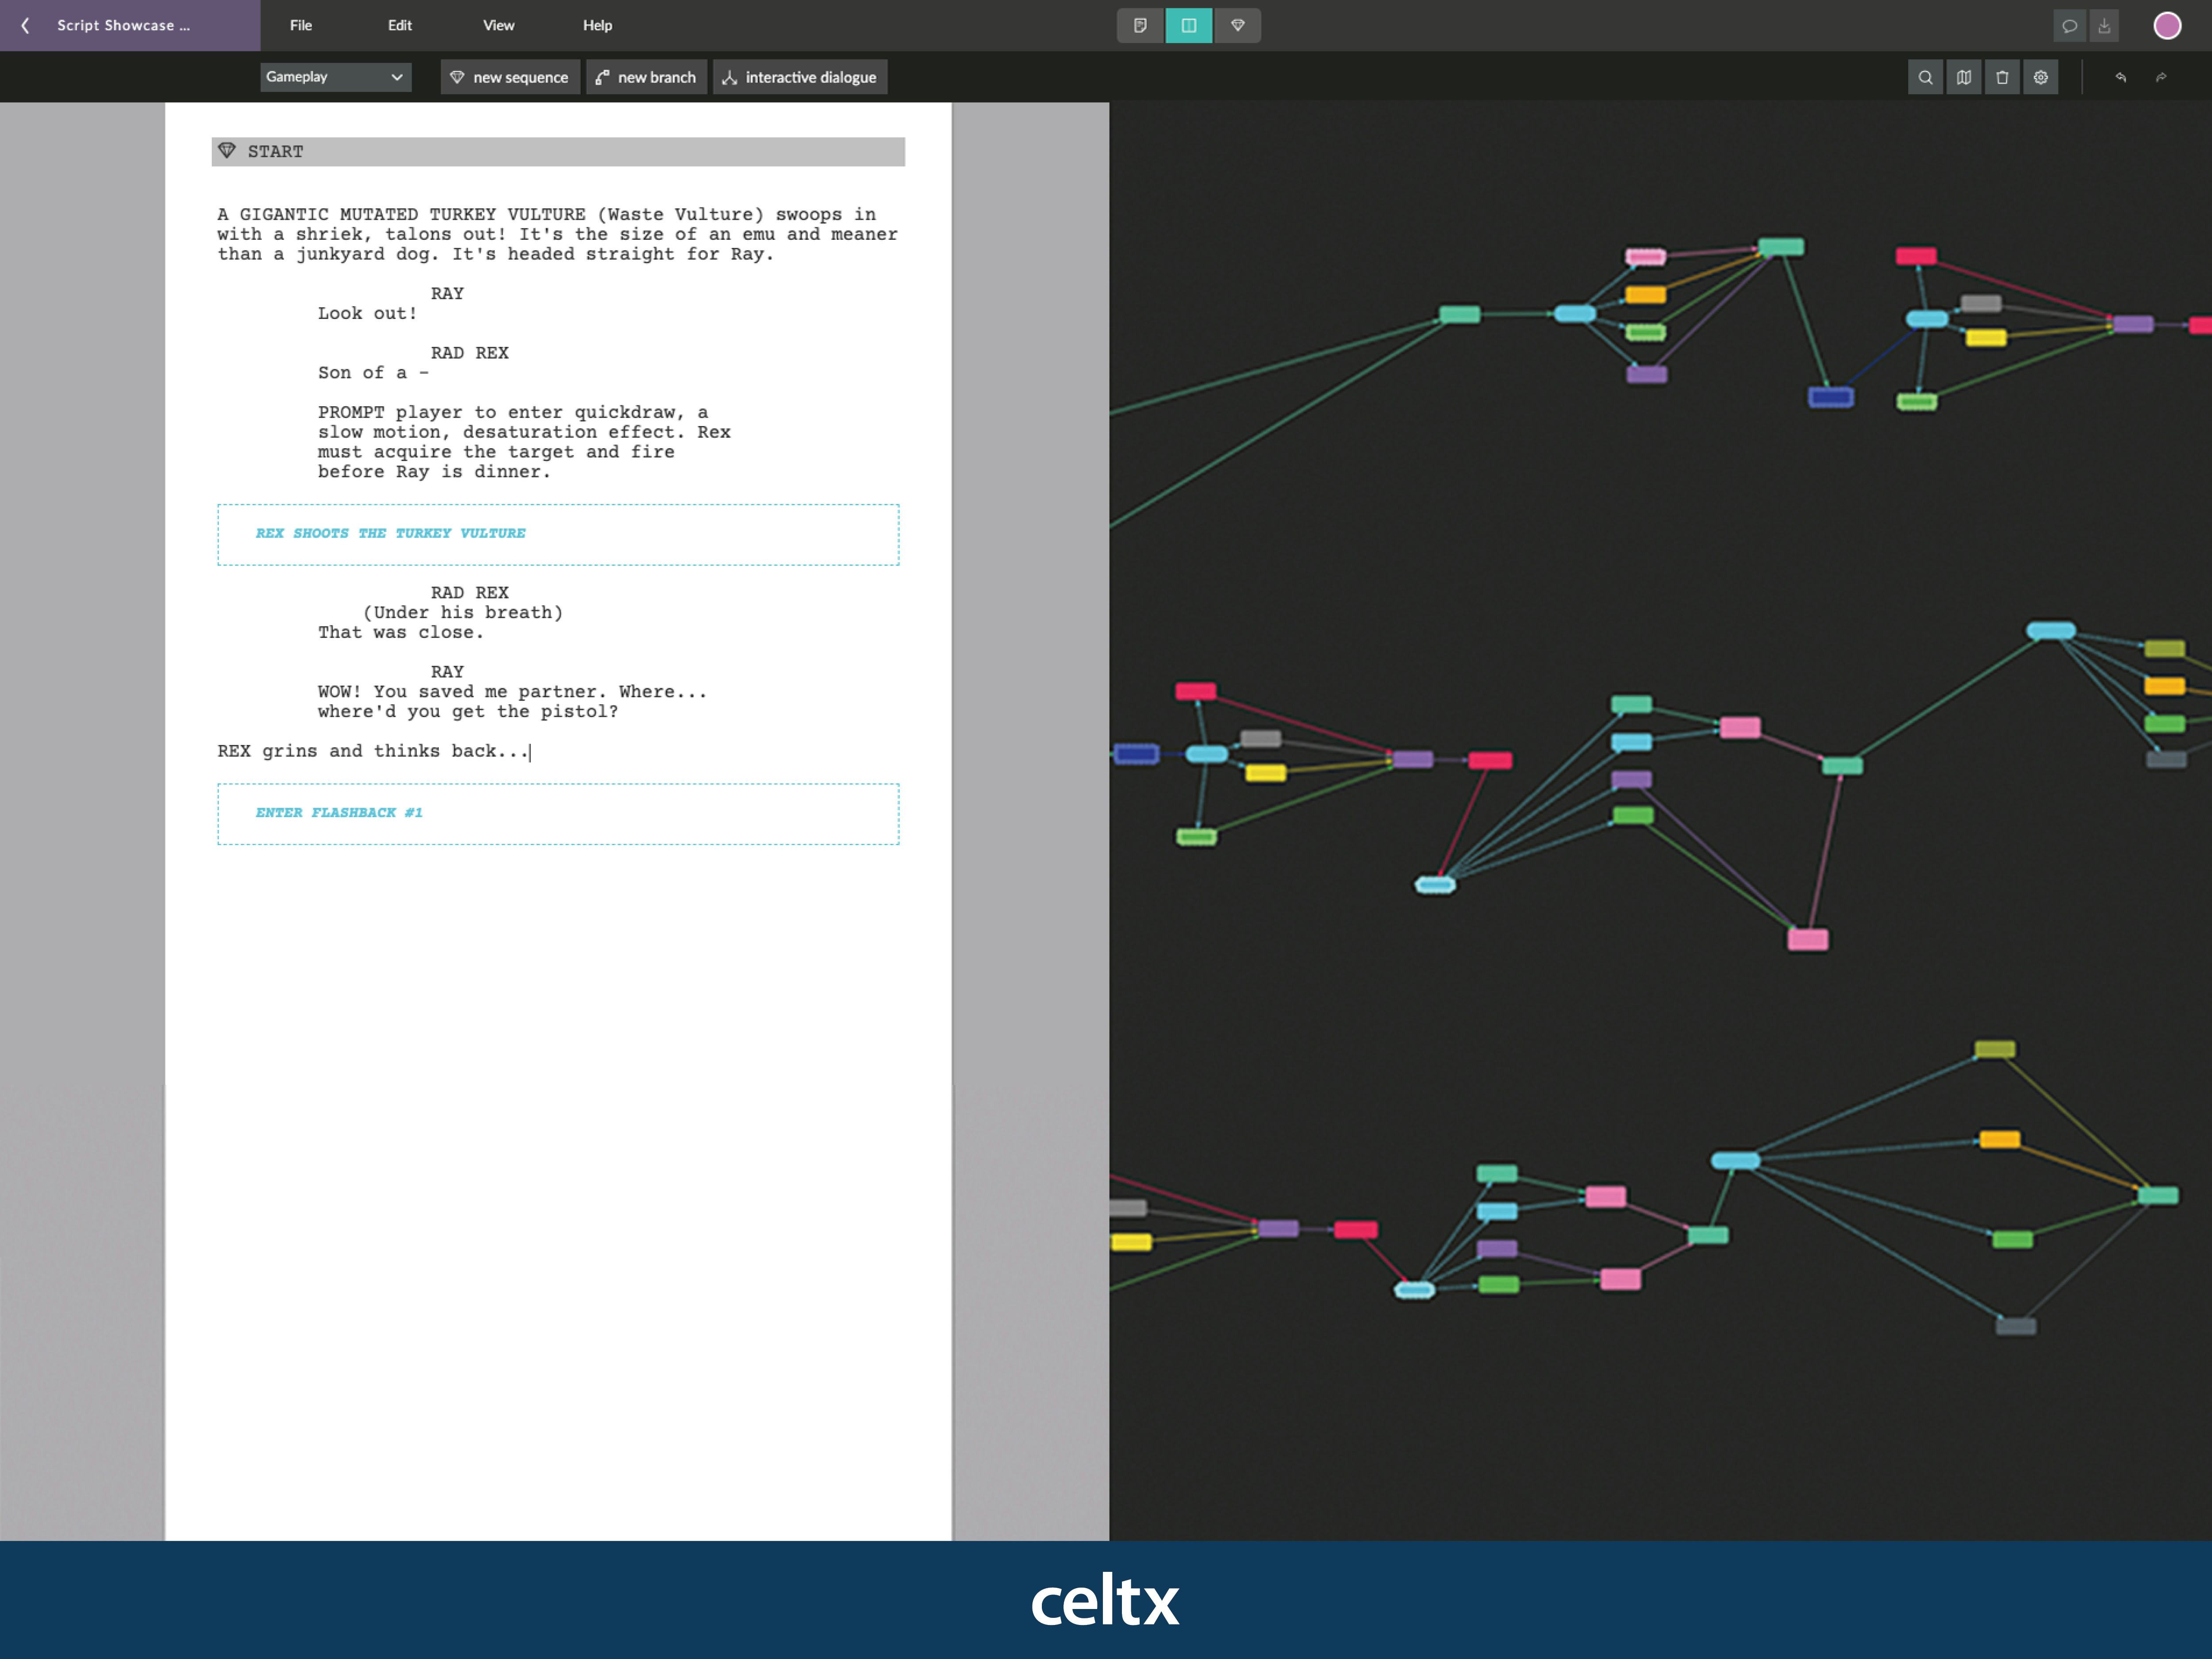 Celtx Software - Weave your story the way you see it. By housing familiar screenplay-style script editing within a branching sequence-based structure, our Game & VR editor enables writers to easily create nonlinear, decision-oriented narratives of unlimited scope.